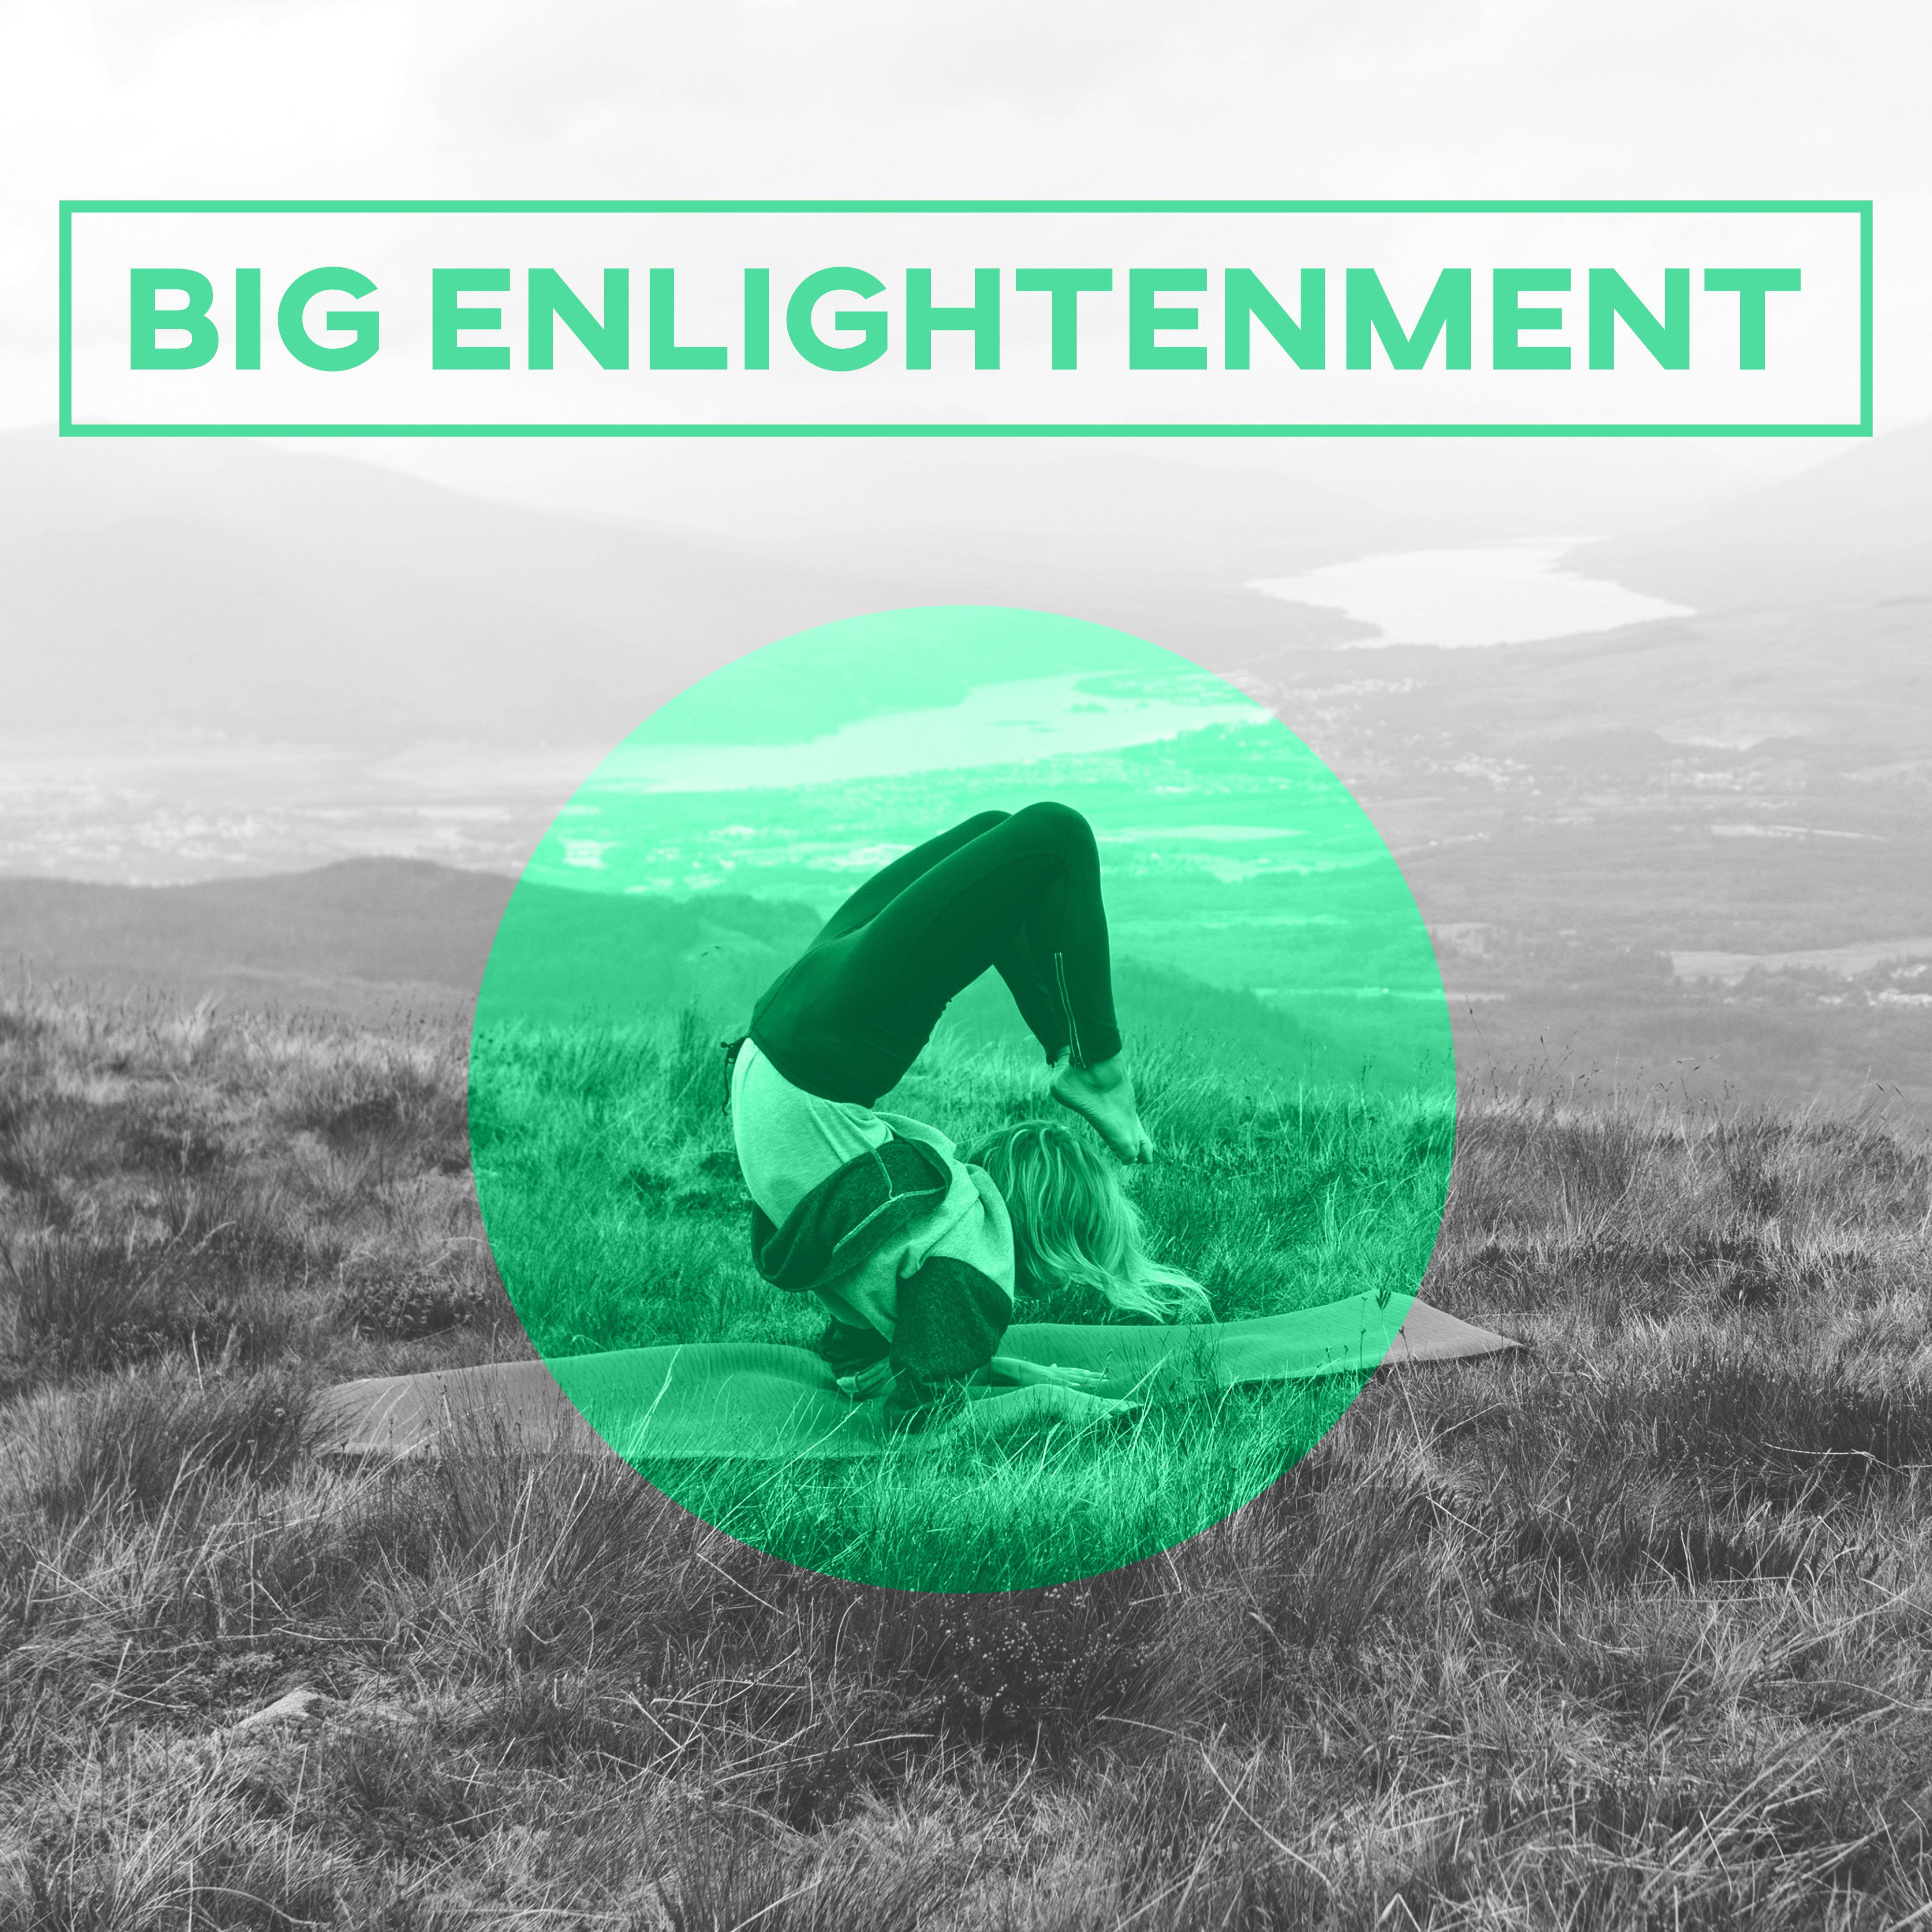 Big Enlightenment  Safety,  Position, Successful, Cleanliness, Snuffing